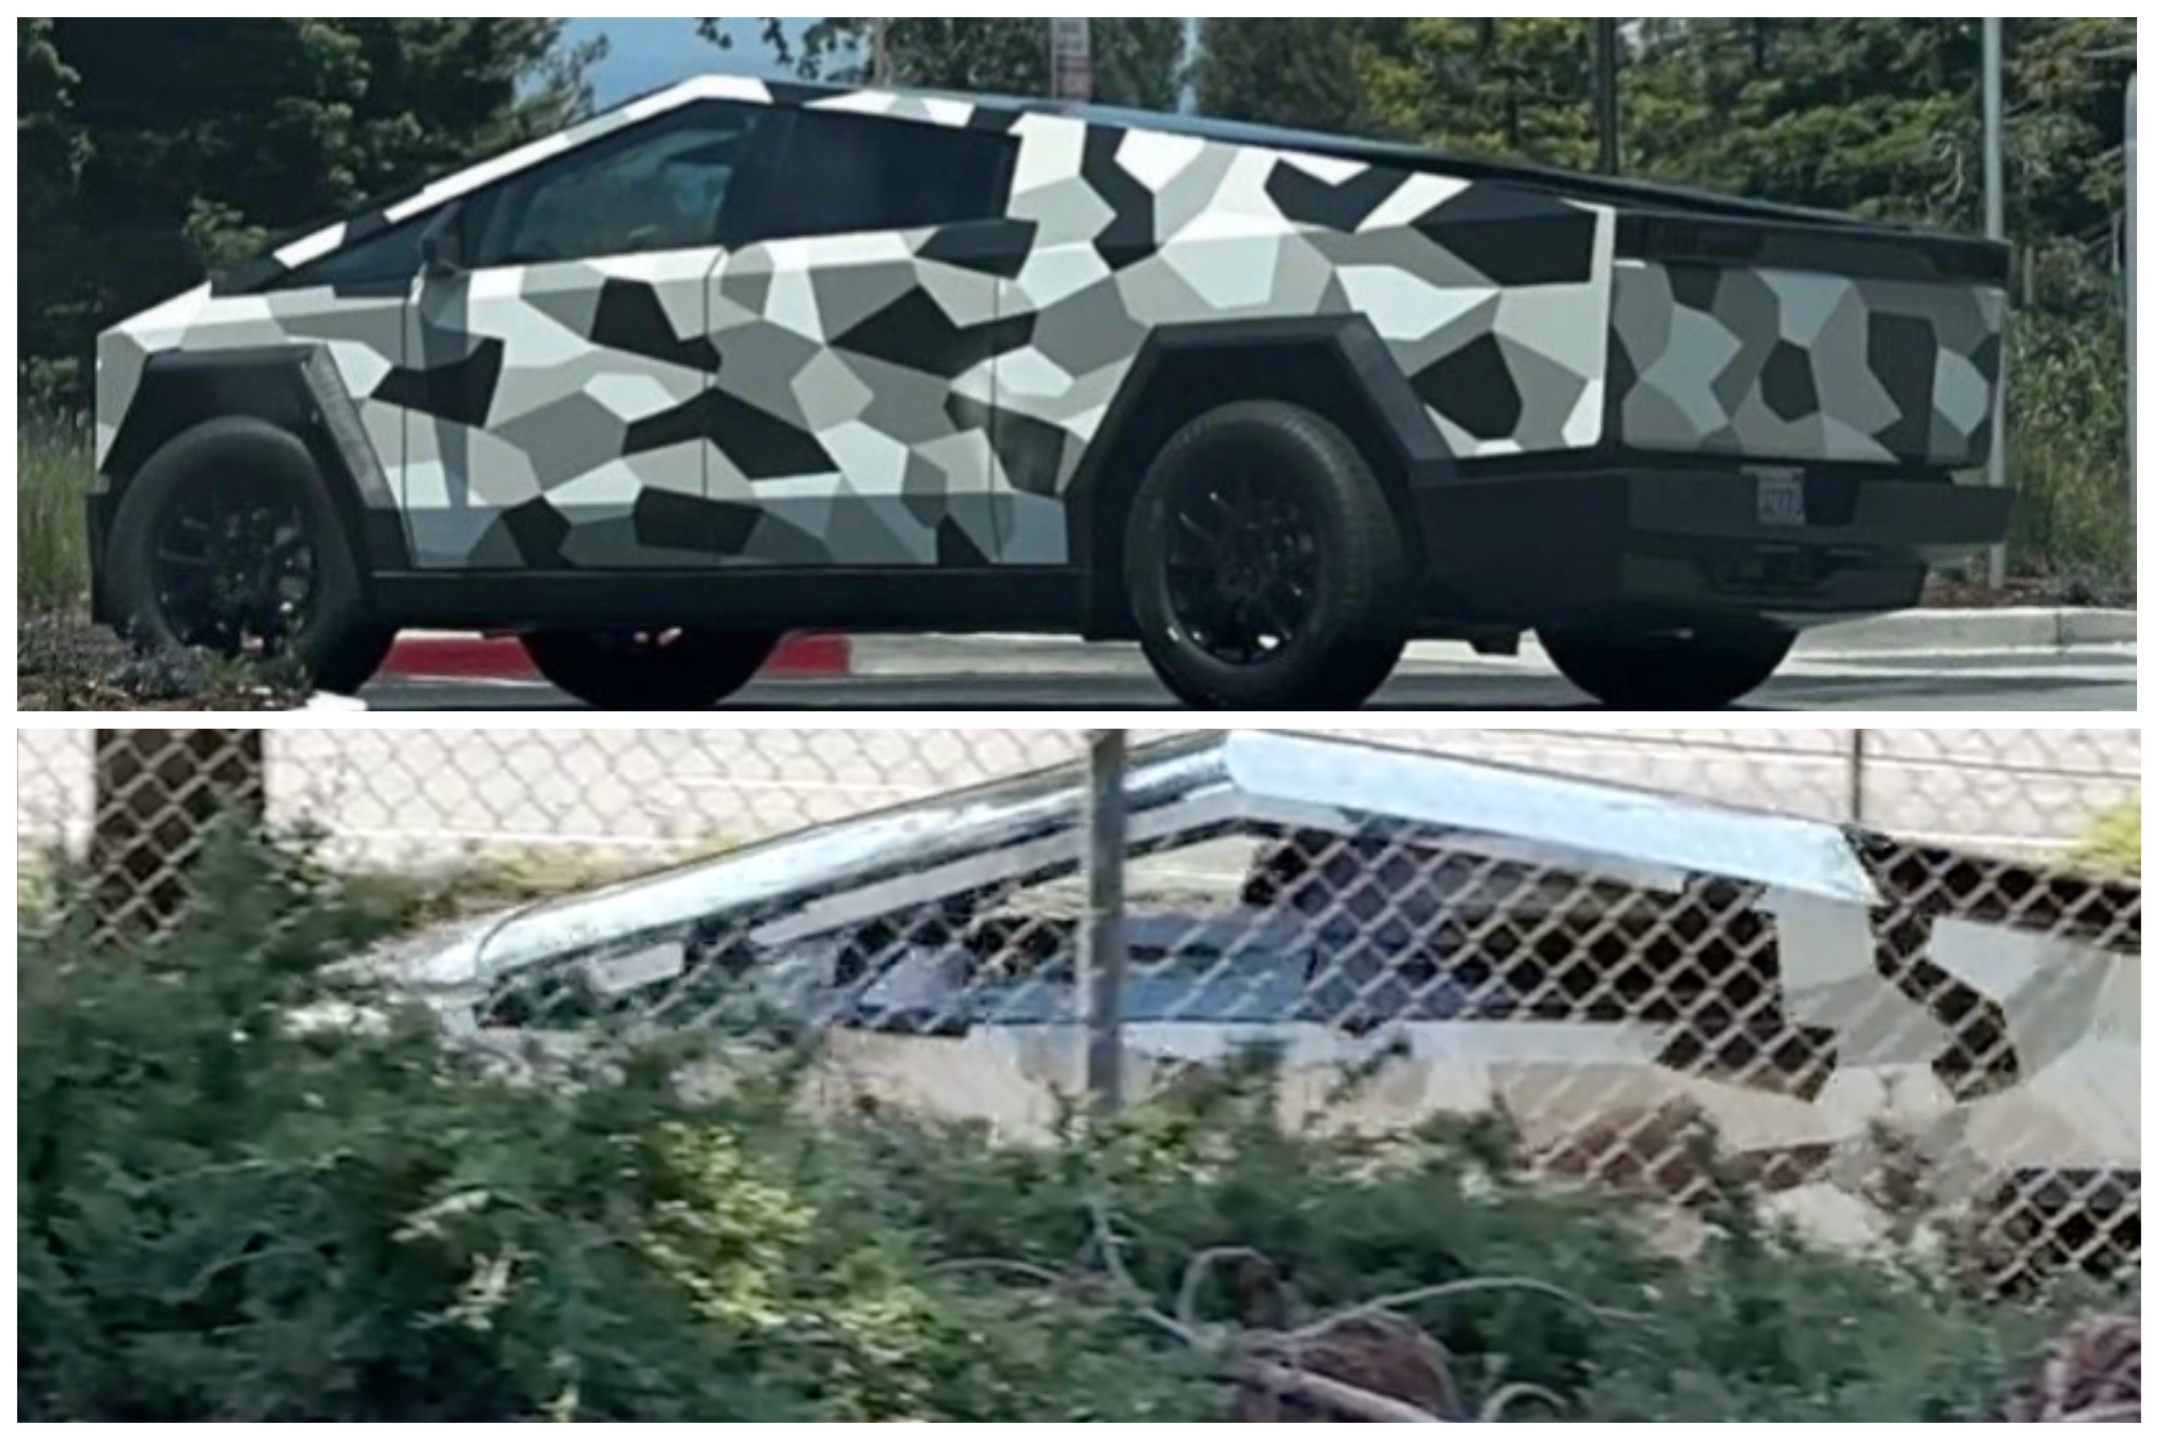 Tesla’s camo-covered Cybertruck continues to make appearances